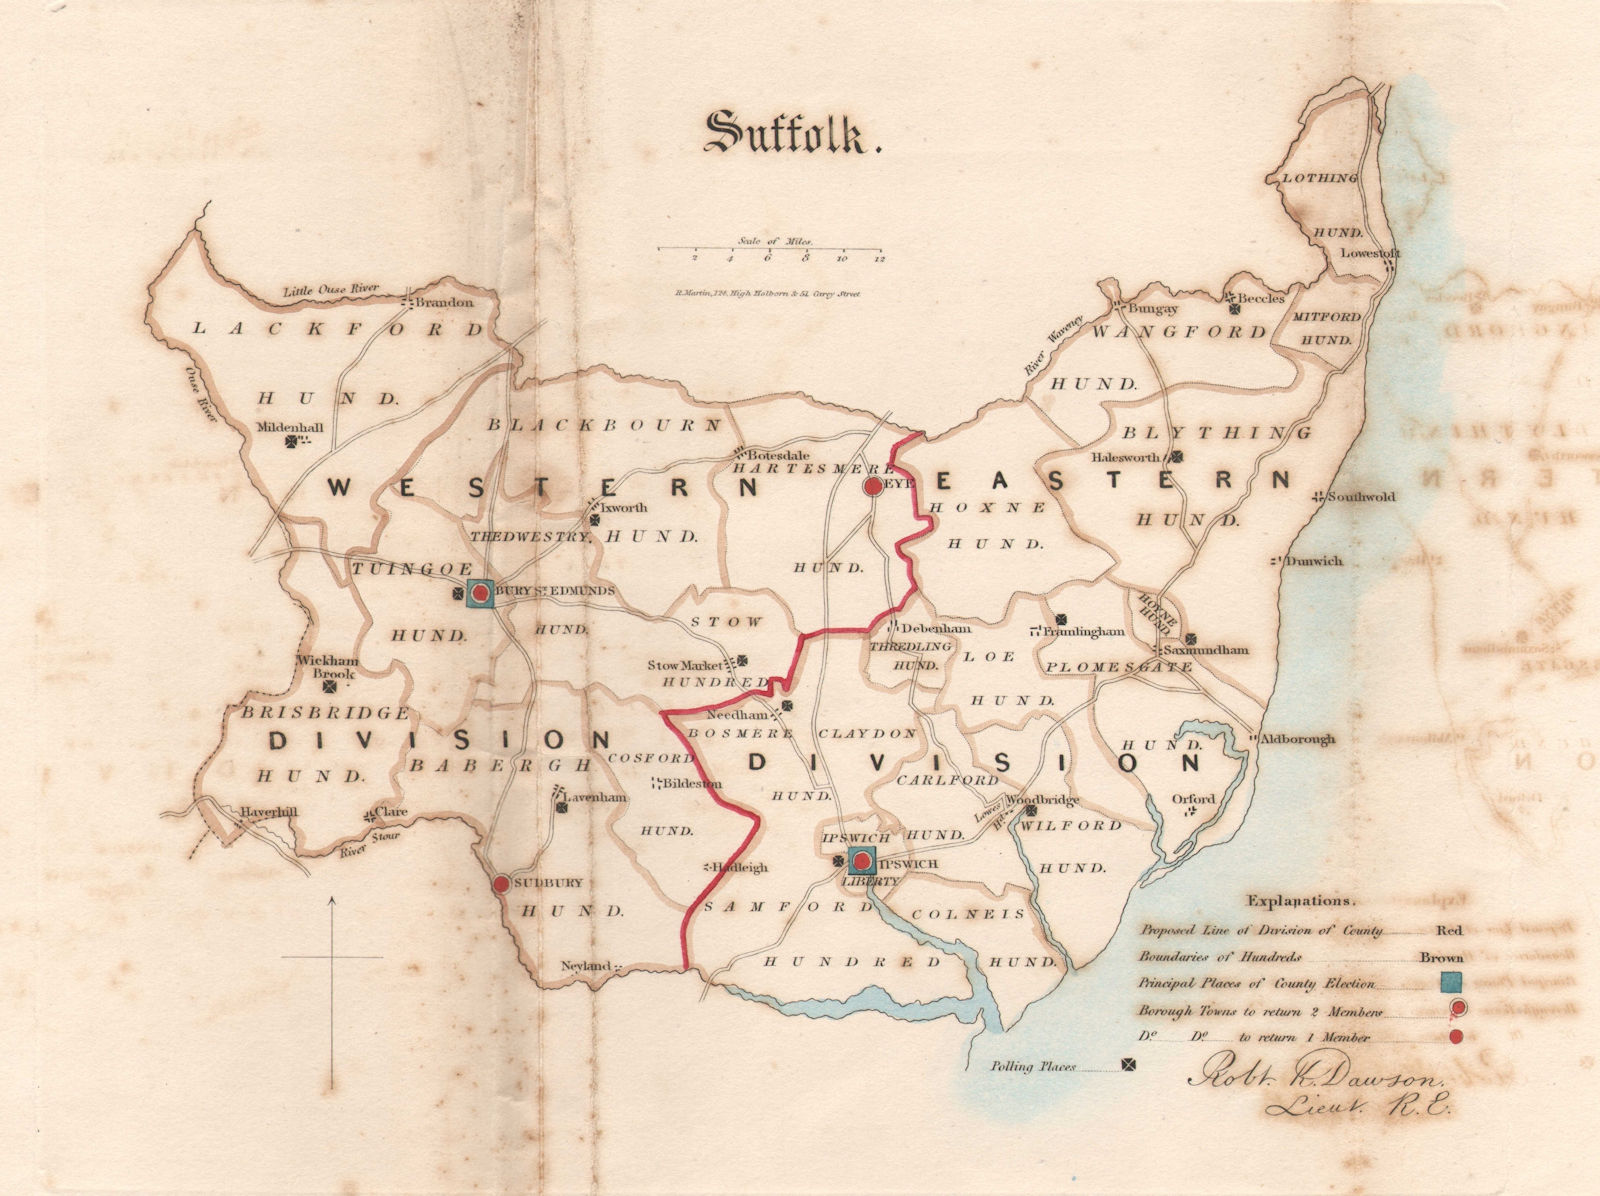 Associate Product Suffolk county map. Divisions electoral boroughs. REFORM ACT. DAWSON 1832